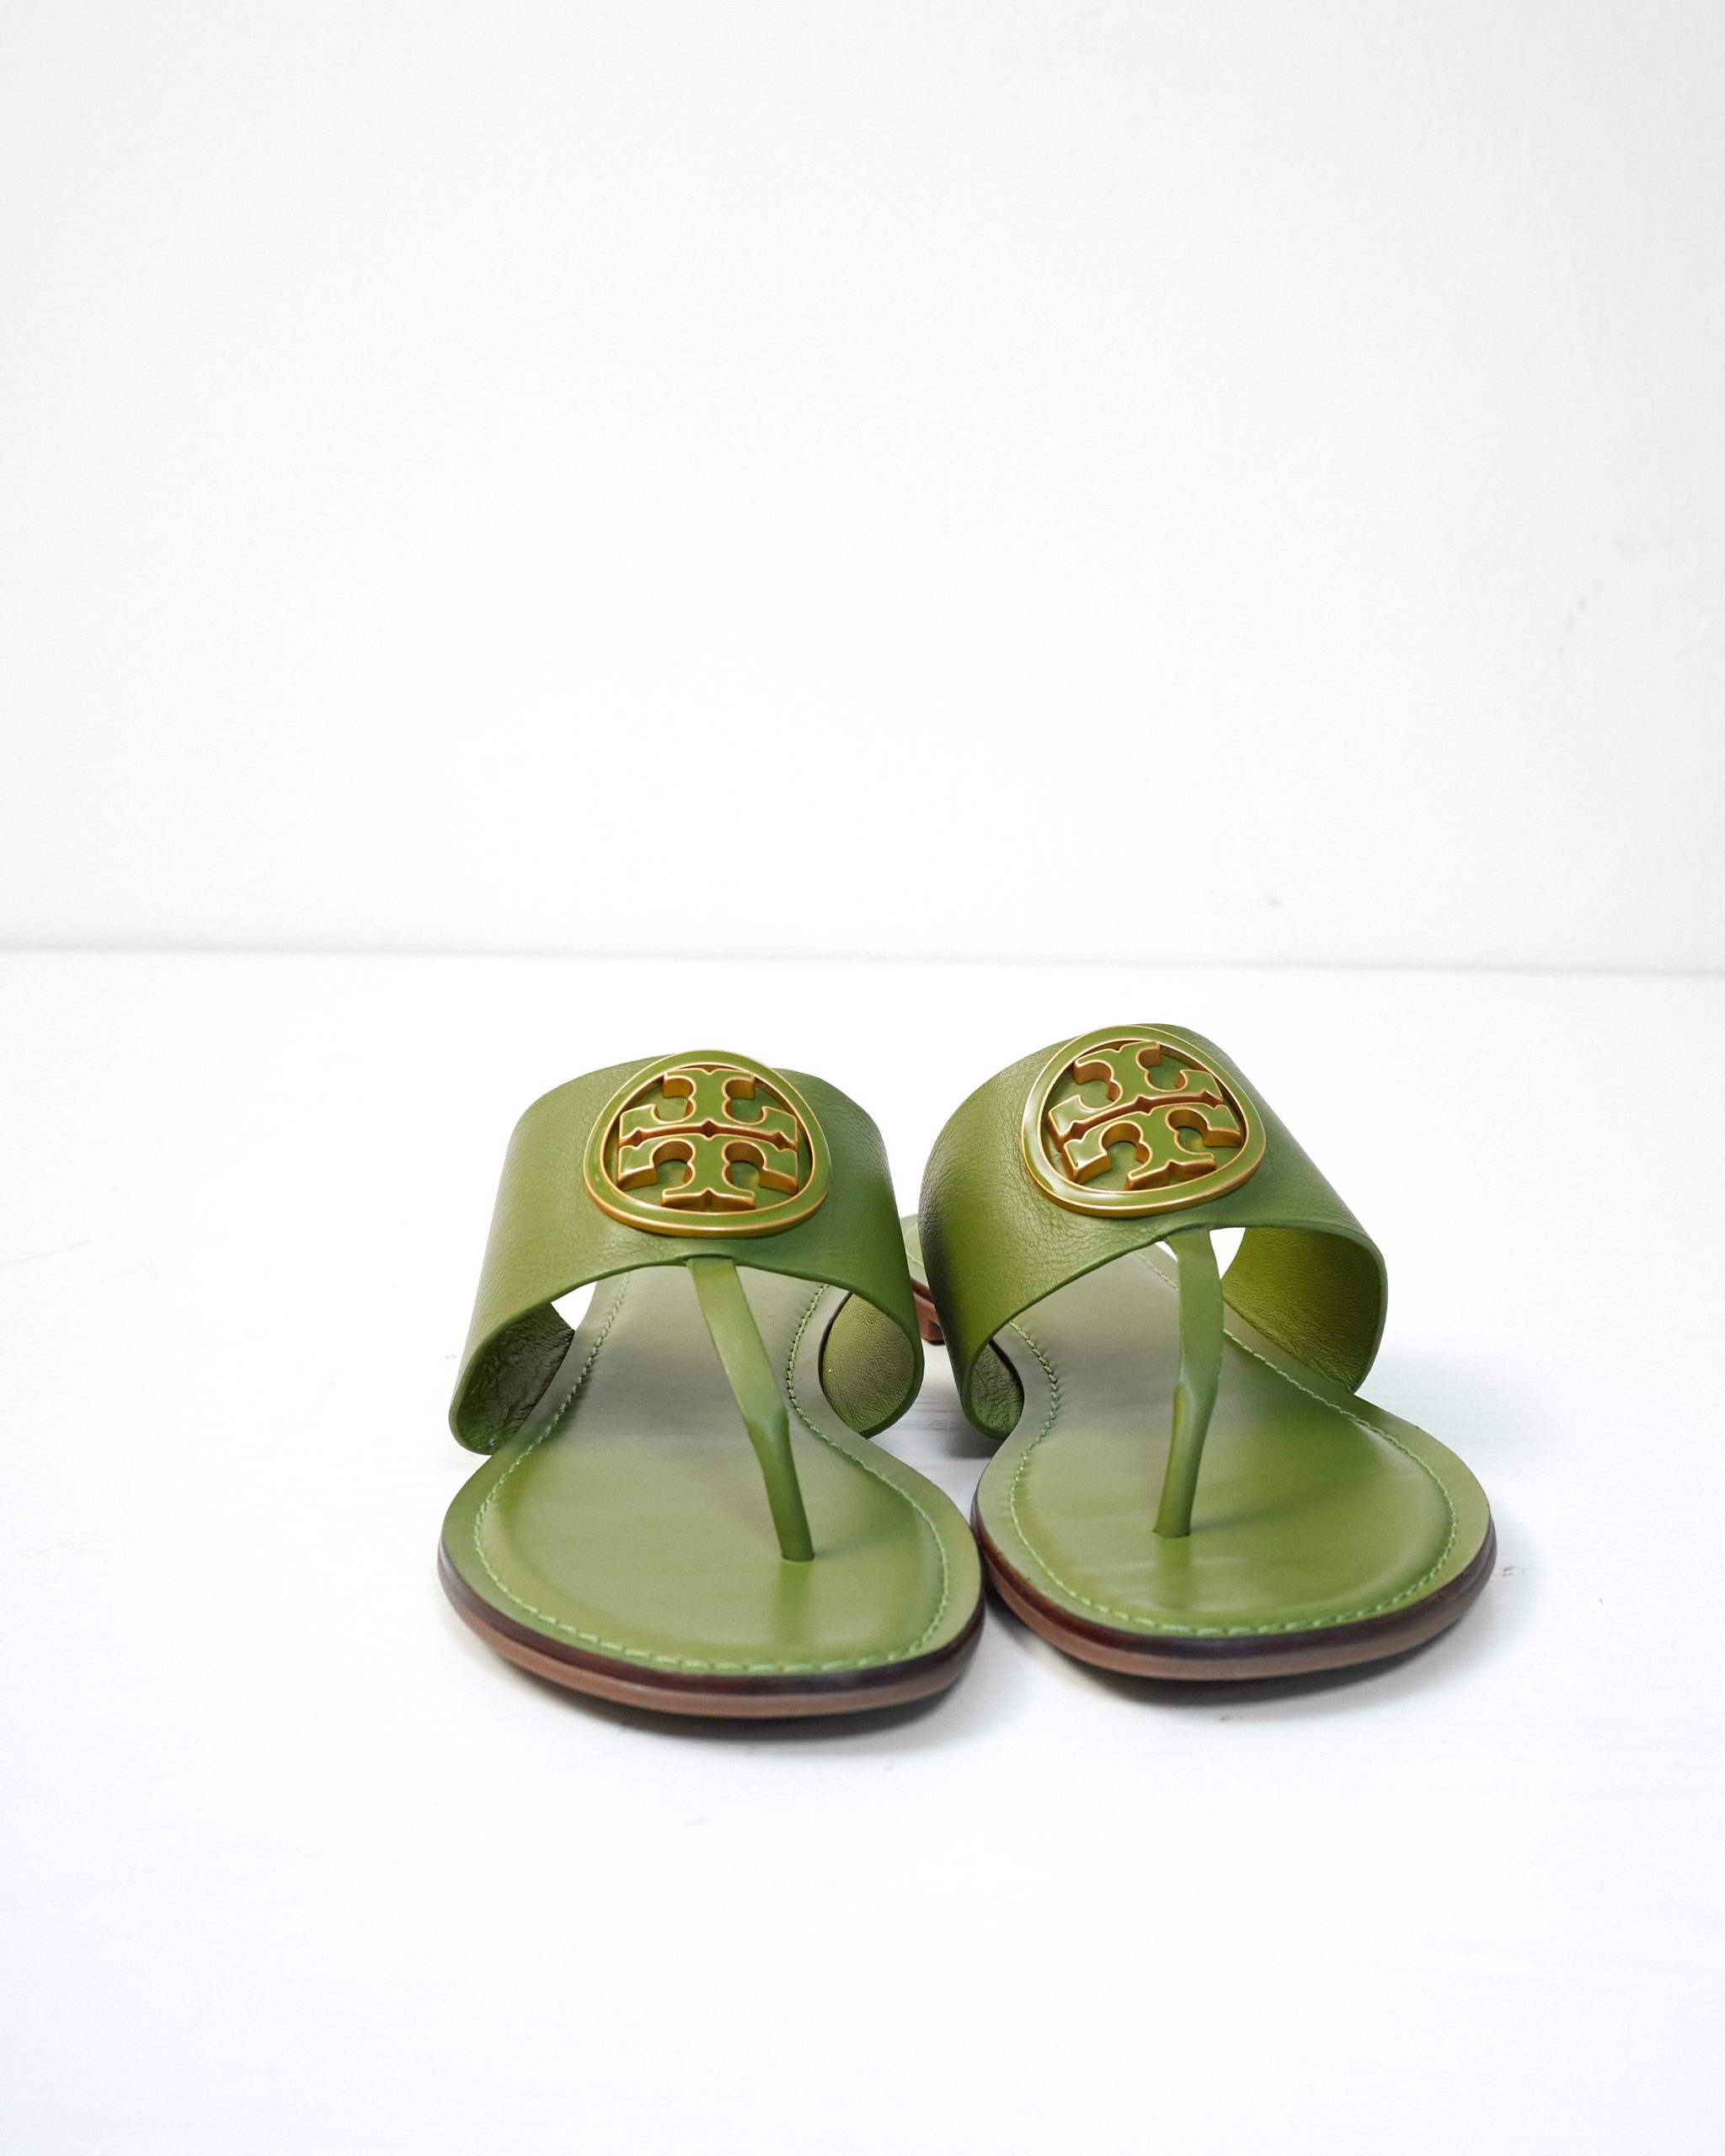 TORY BURCH BENTON BAND SHISO OLIVE CALF LEATHER GOLD LOGO SLIPPERS – Posh  Apparels